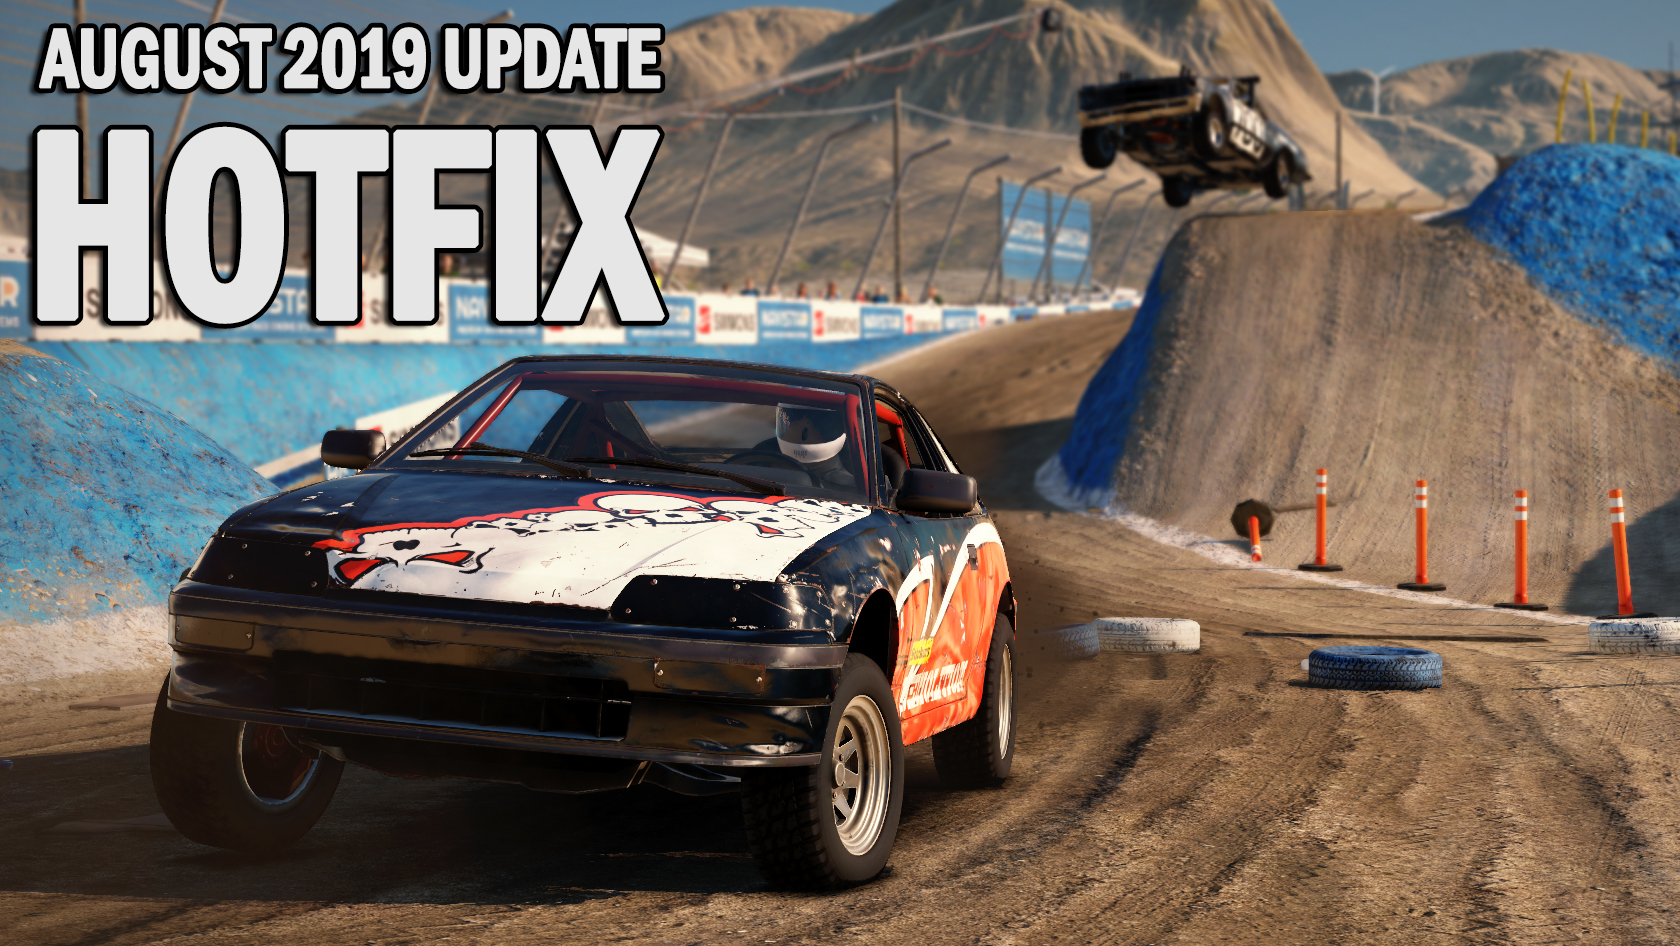 Hotfix Released reviews